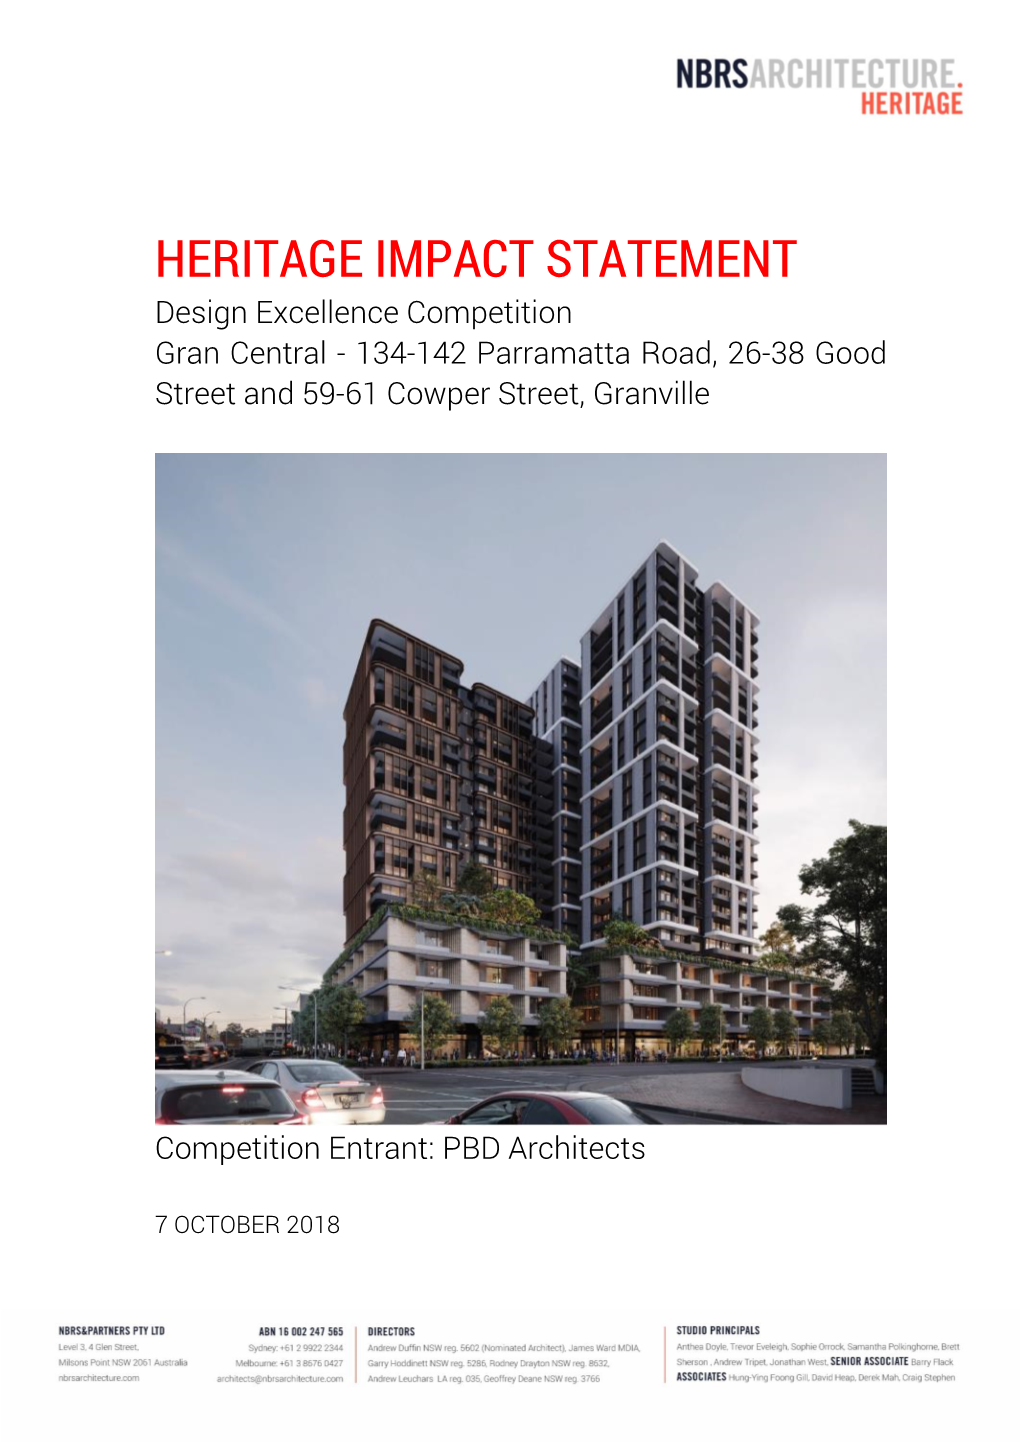 HERITAGE IMPACT STATEMENT Design Excellence Competition Gran Central - 134-142 Parramatta Road, 26-38 Good Street and 59-61 Cowper Street, Granville